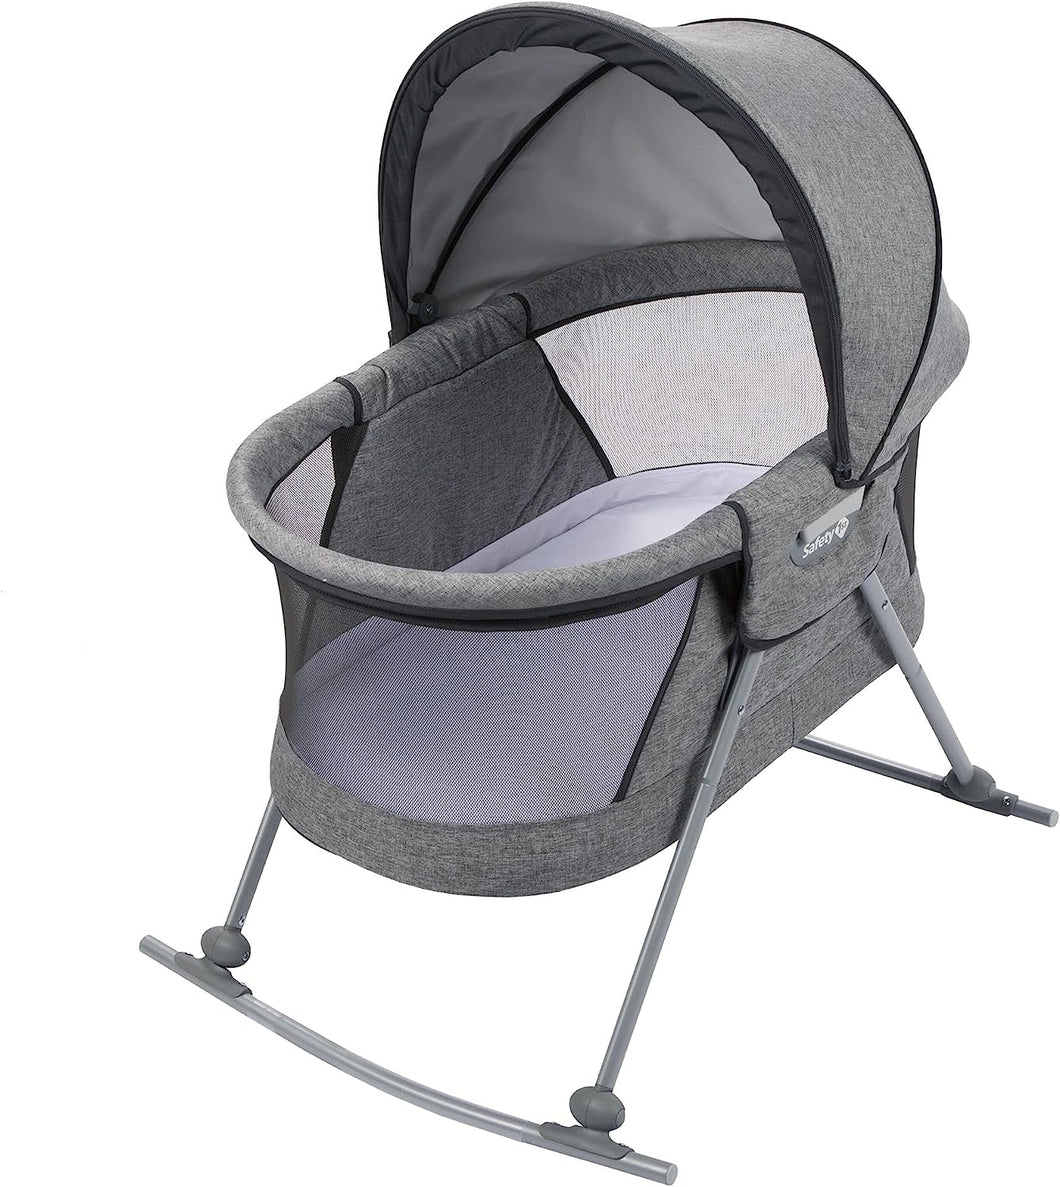 Safety 1st Nap and Go Rocking Bassinet with travel bag